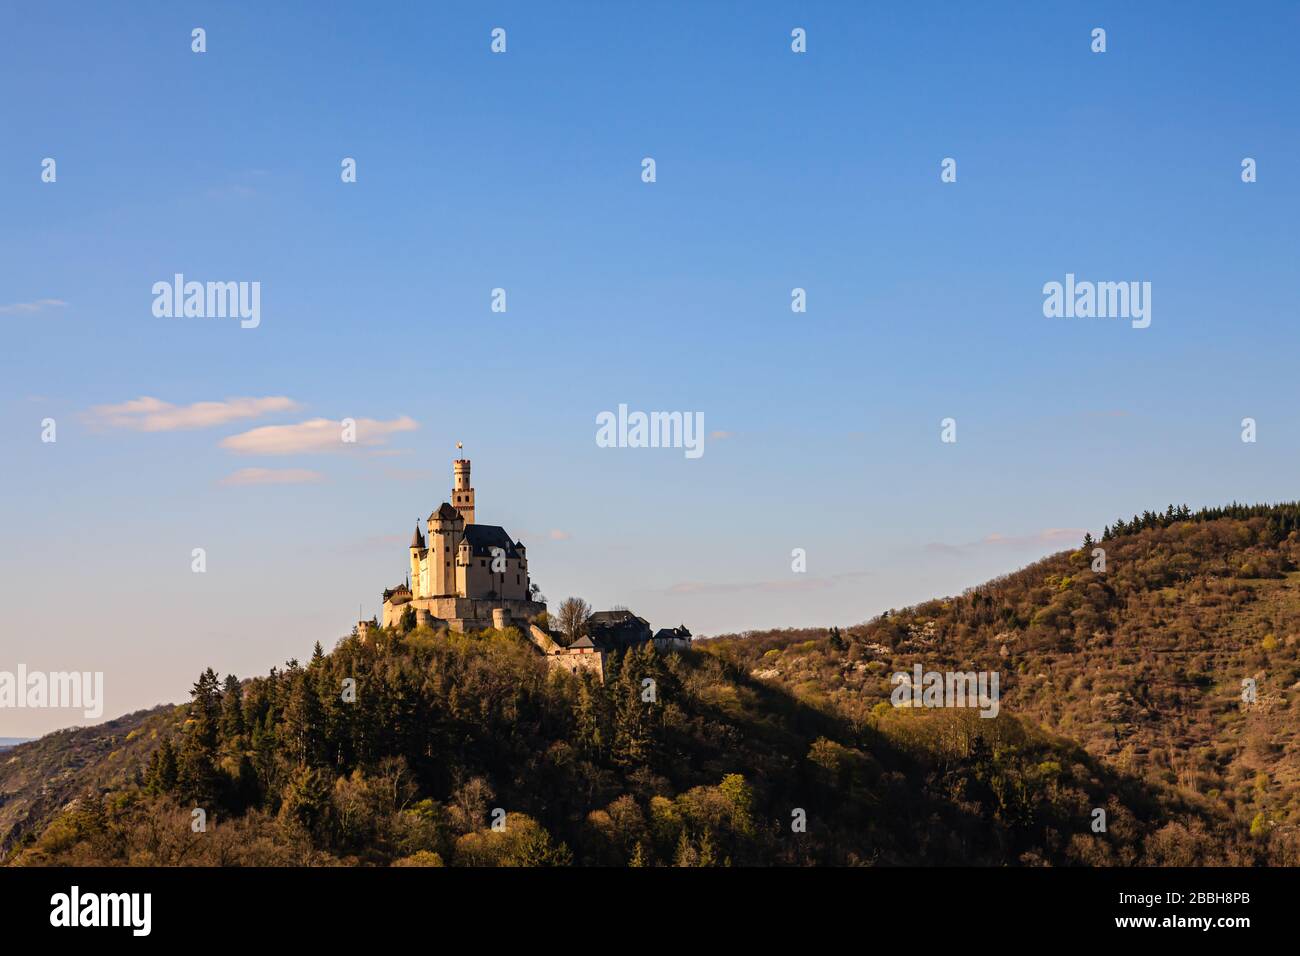 Marksburg castle at dusk in spring, braubach, rhine, germany, world-culture-heritage Stock Photo